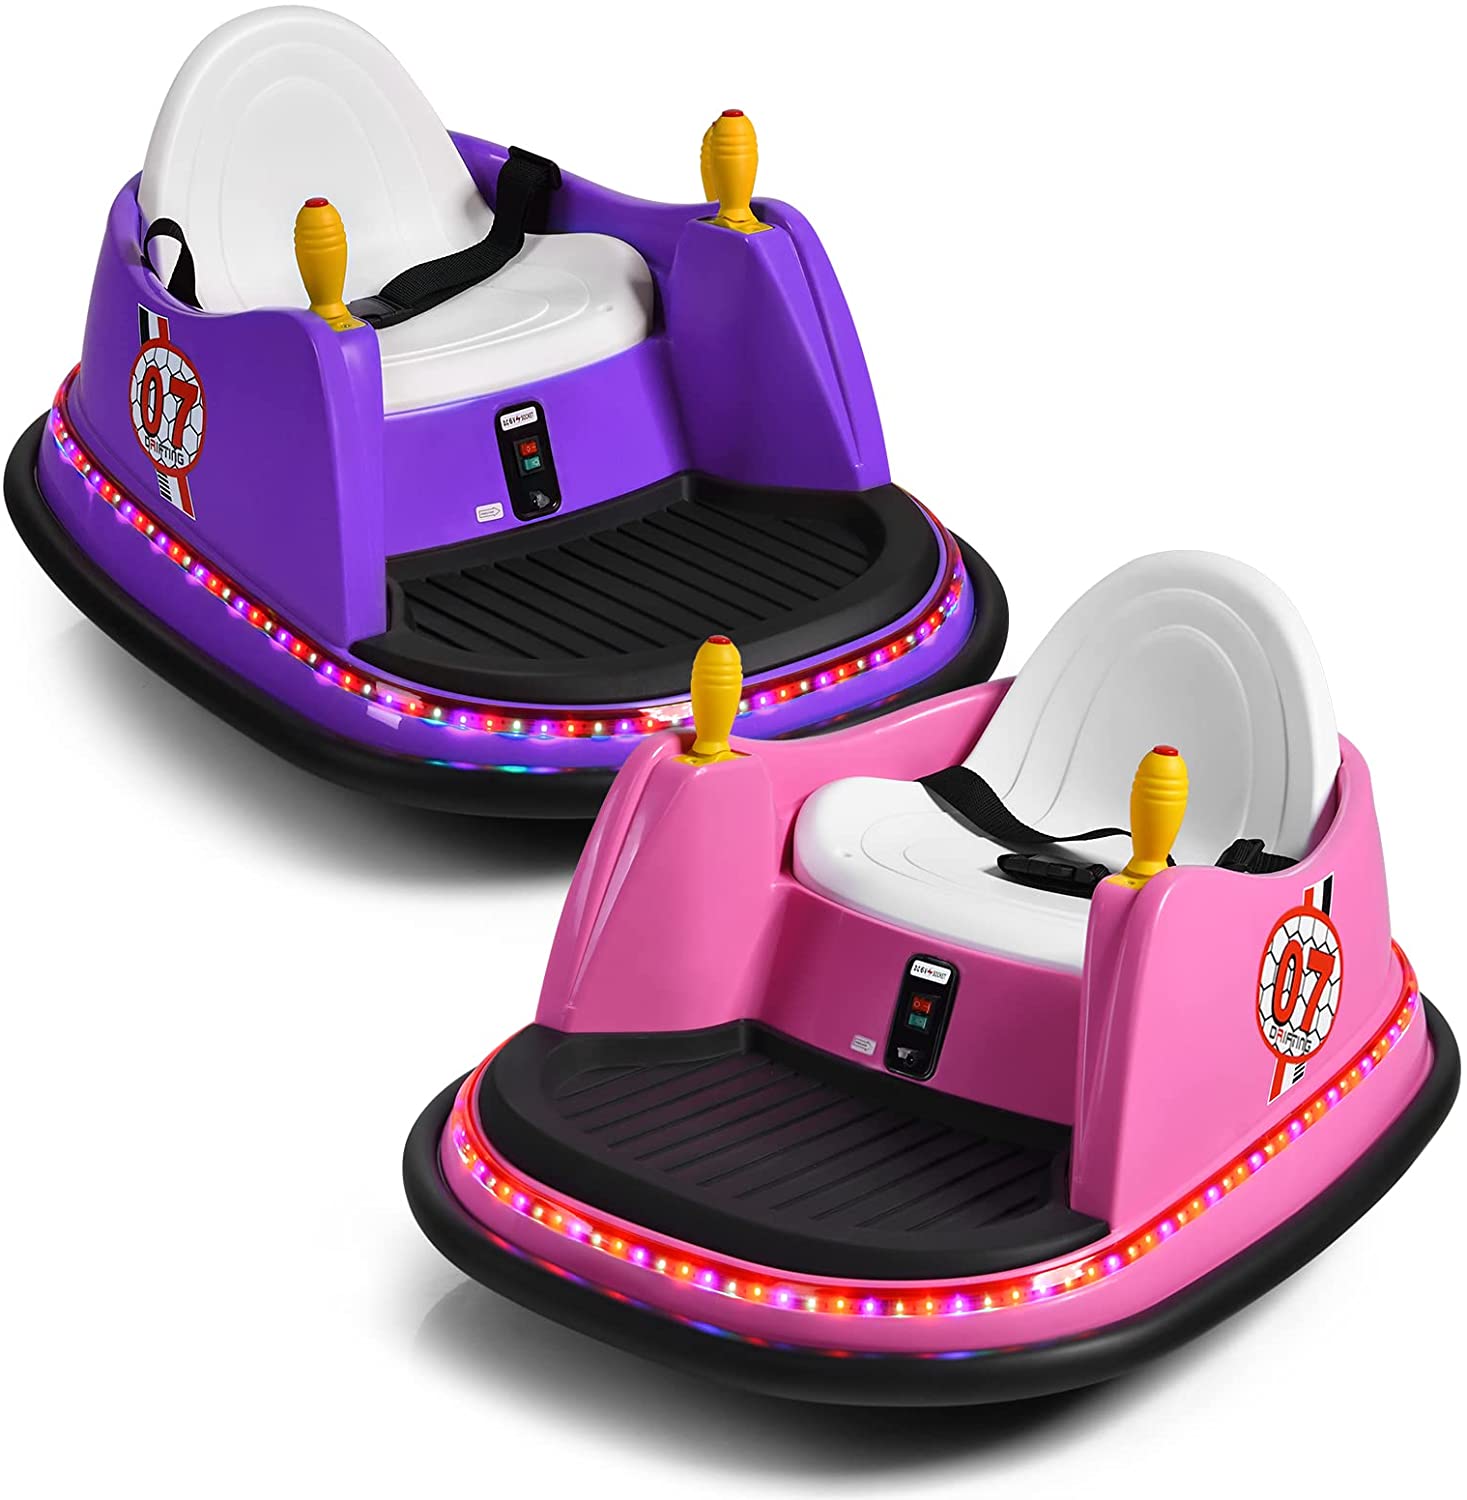 Bumper Car for Kids, 6V Battery Powered Electric Vehicle, Pink + Purple